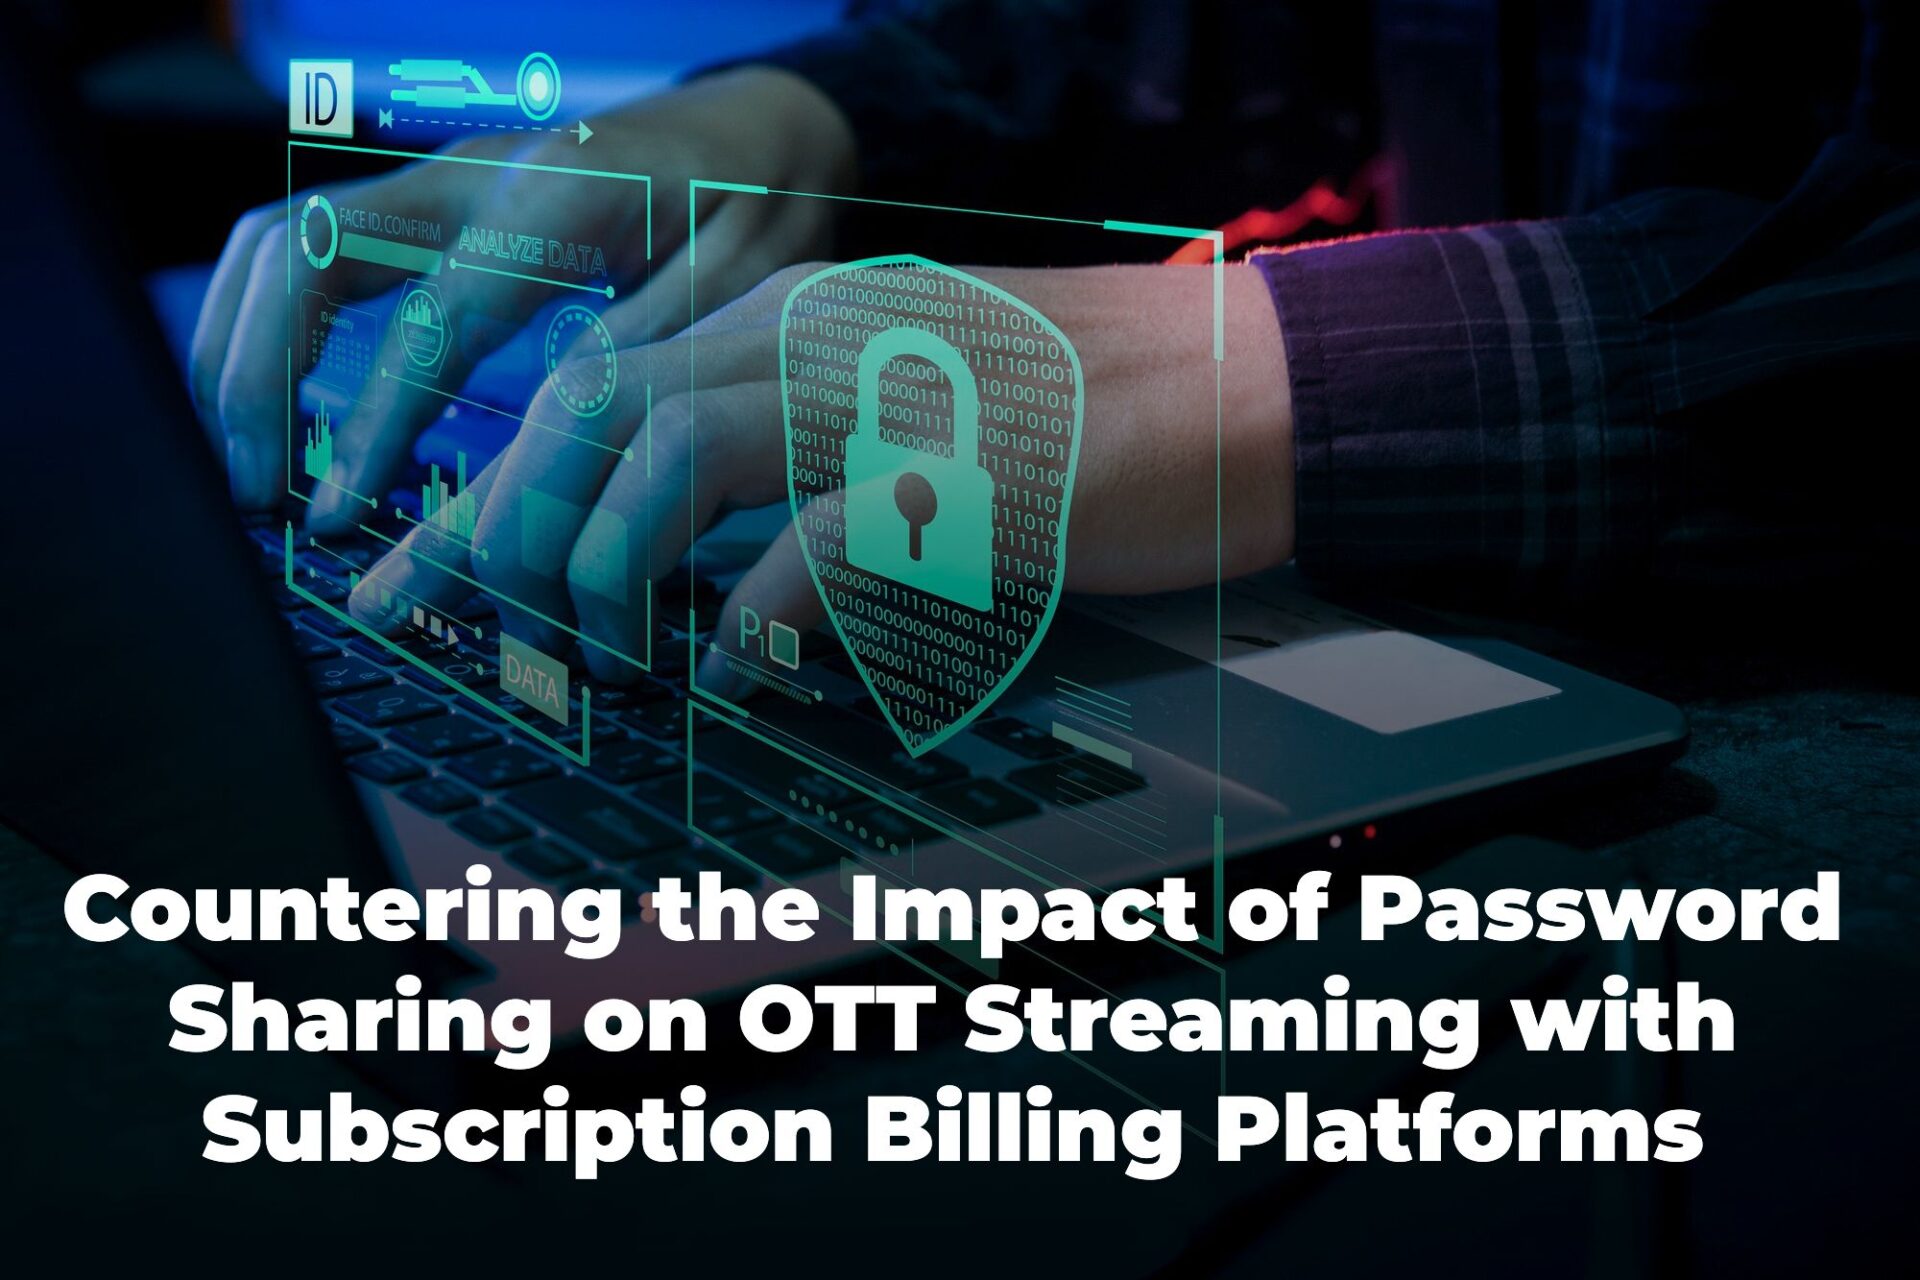 Countering the Impact of Password Sharing on OTT Streaming with Subscription Billing Platforms